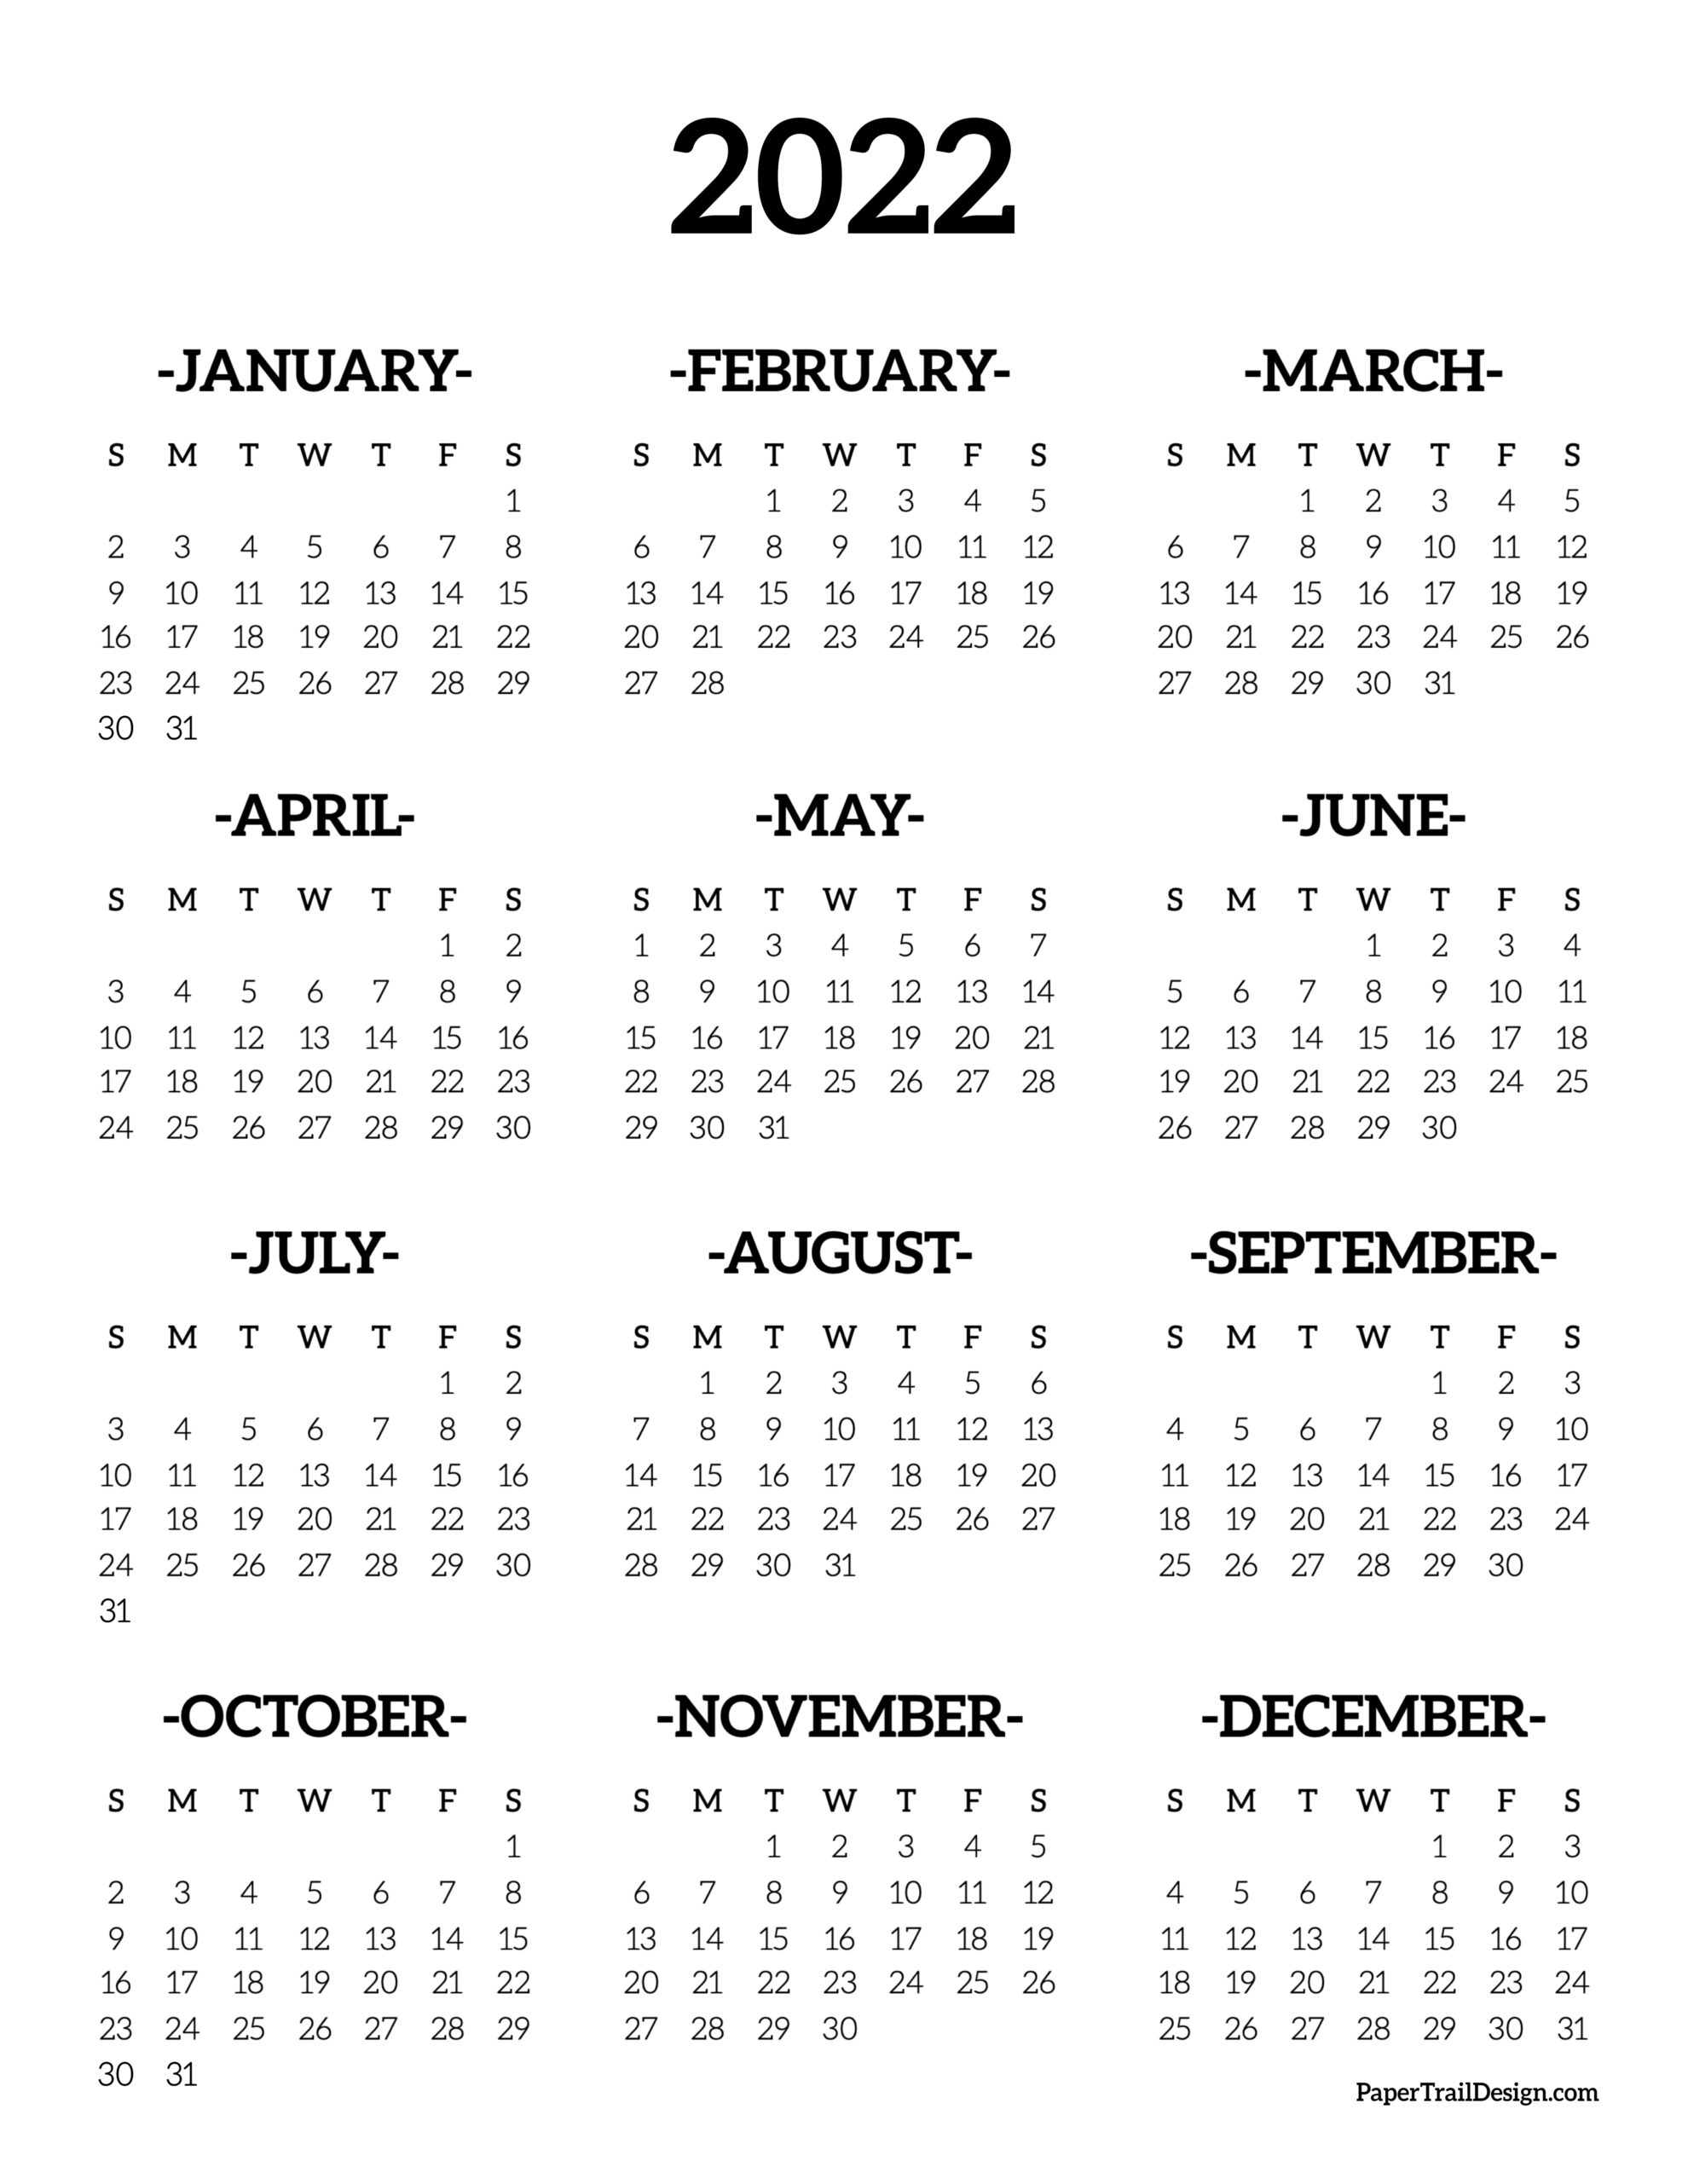 Printable Calendar 2022 One Page Calendar 2022 Printable One Page - Paper Trail Design